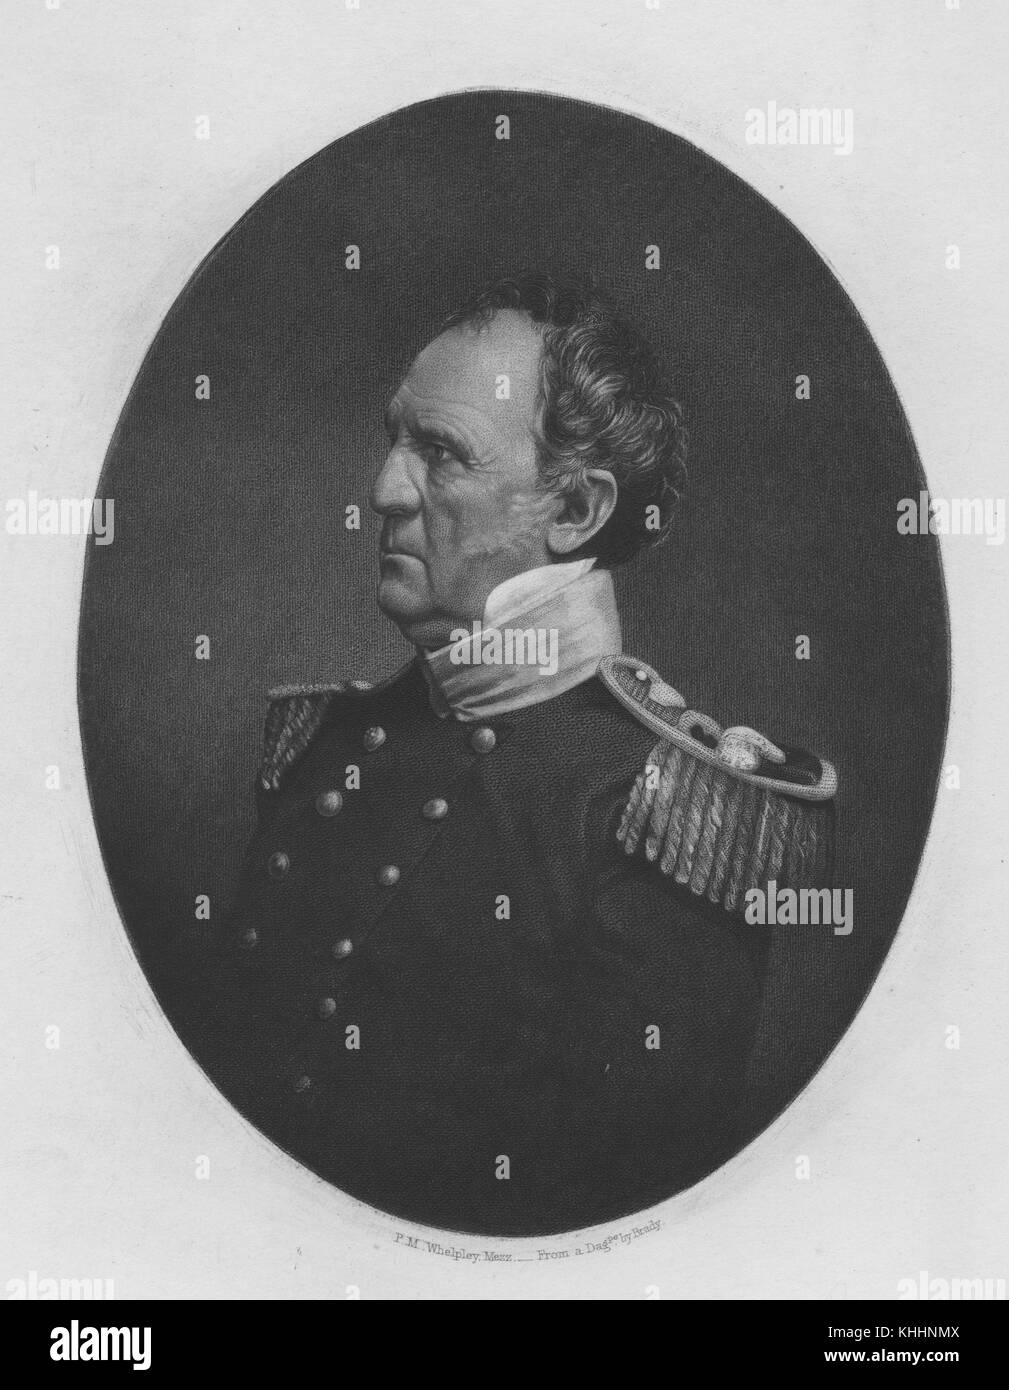 Engraved portrait of Winfield Scott, Major General for the United States Army, from a daguerreotype by Brady, 1900. From the New York Public Library. Stock Photo